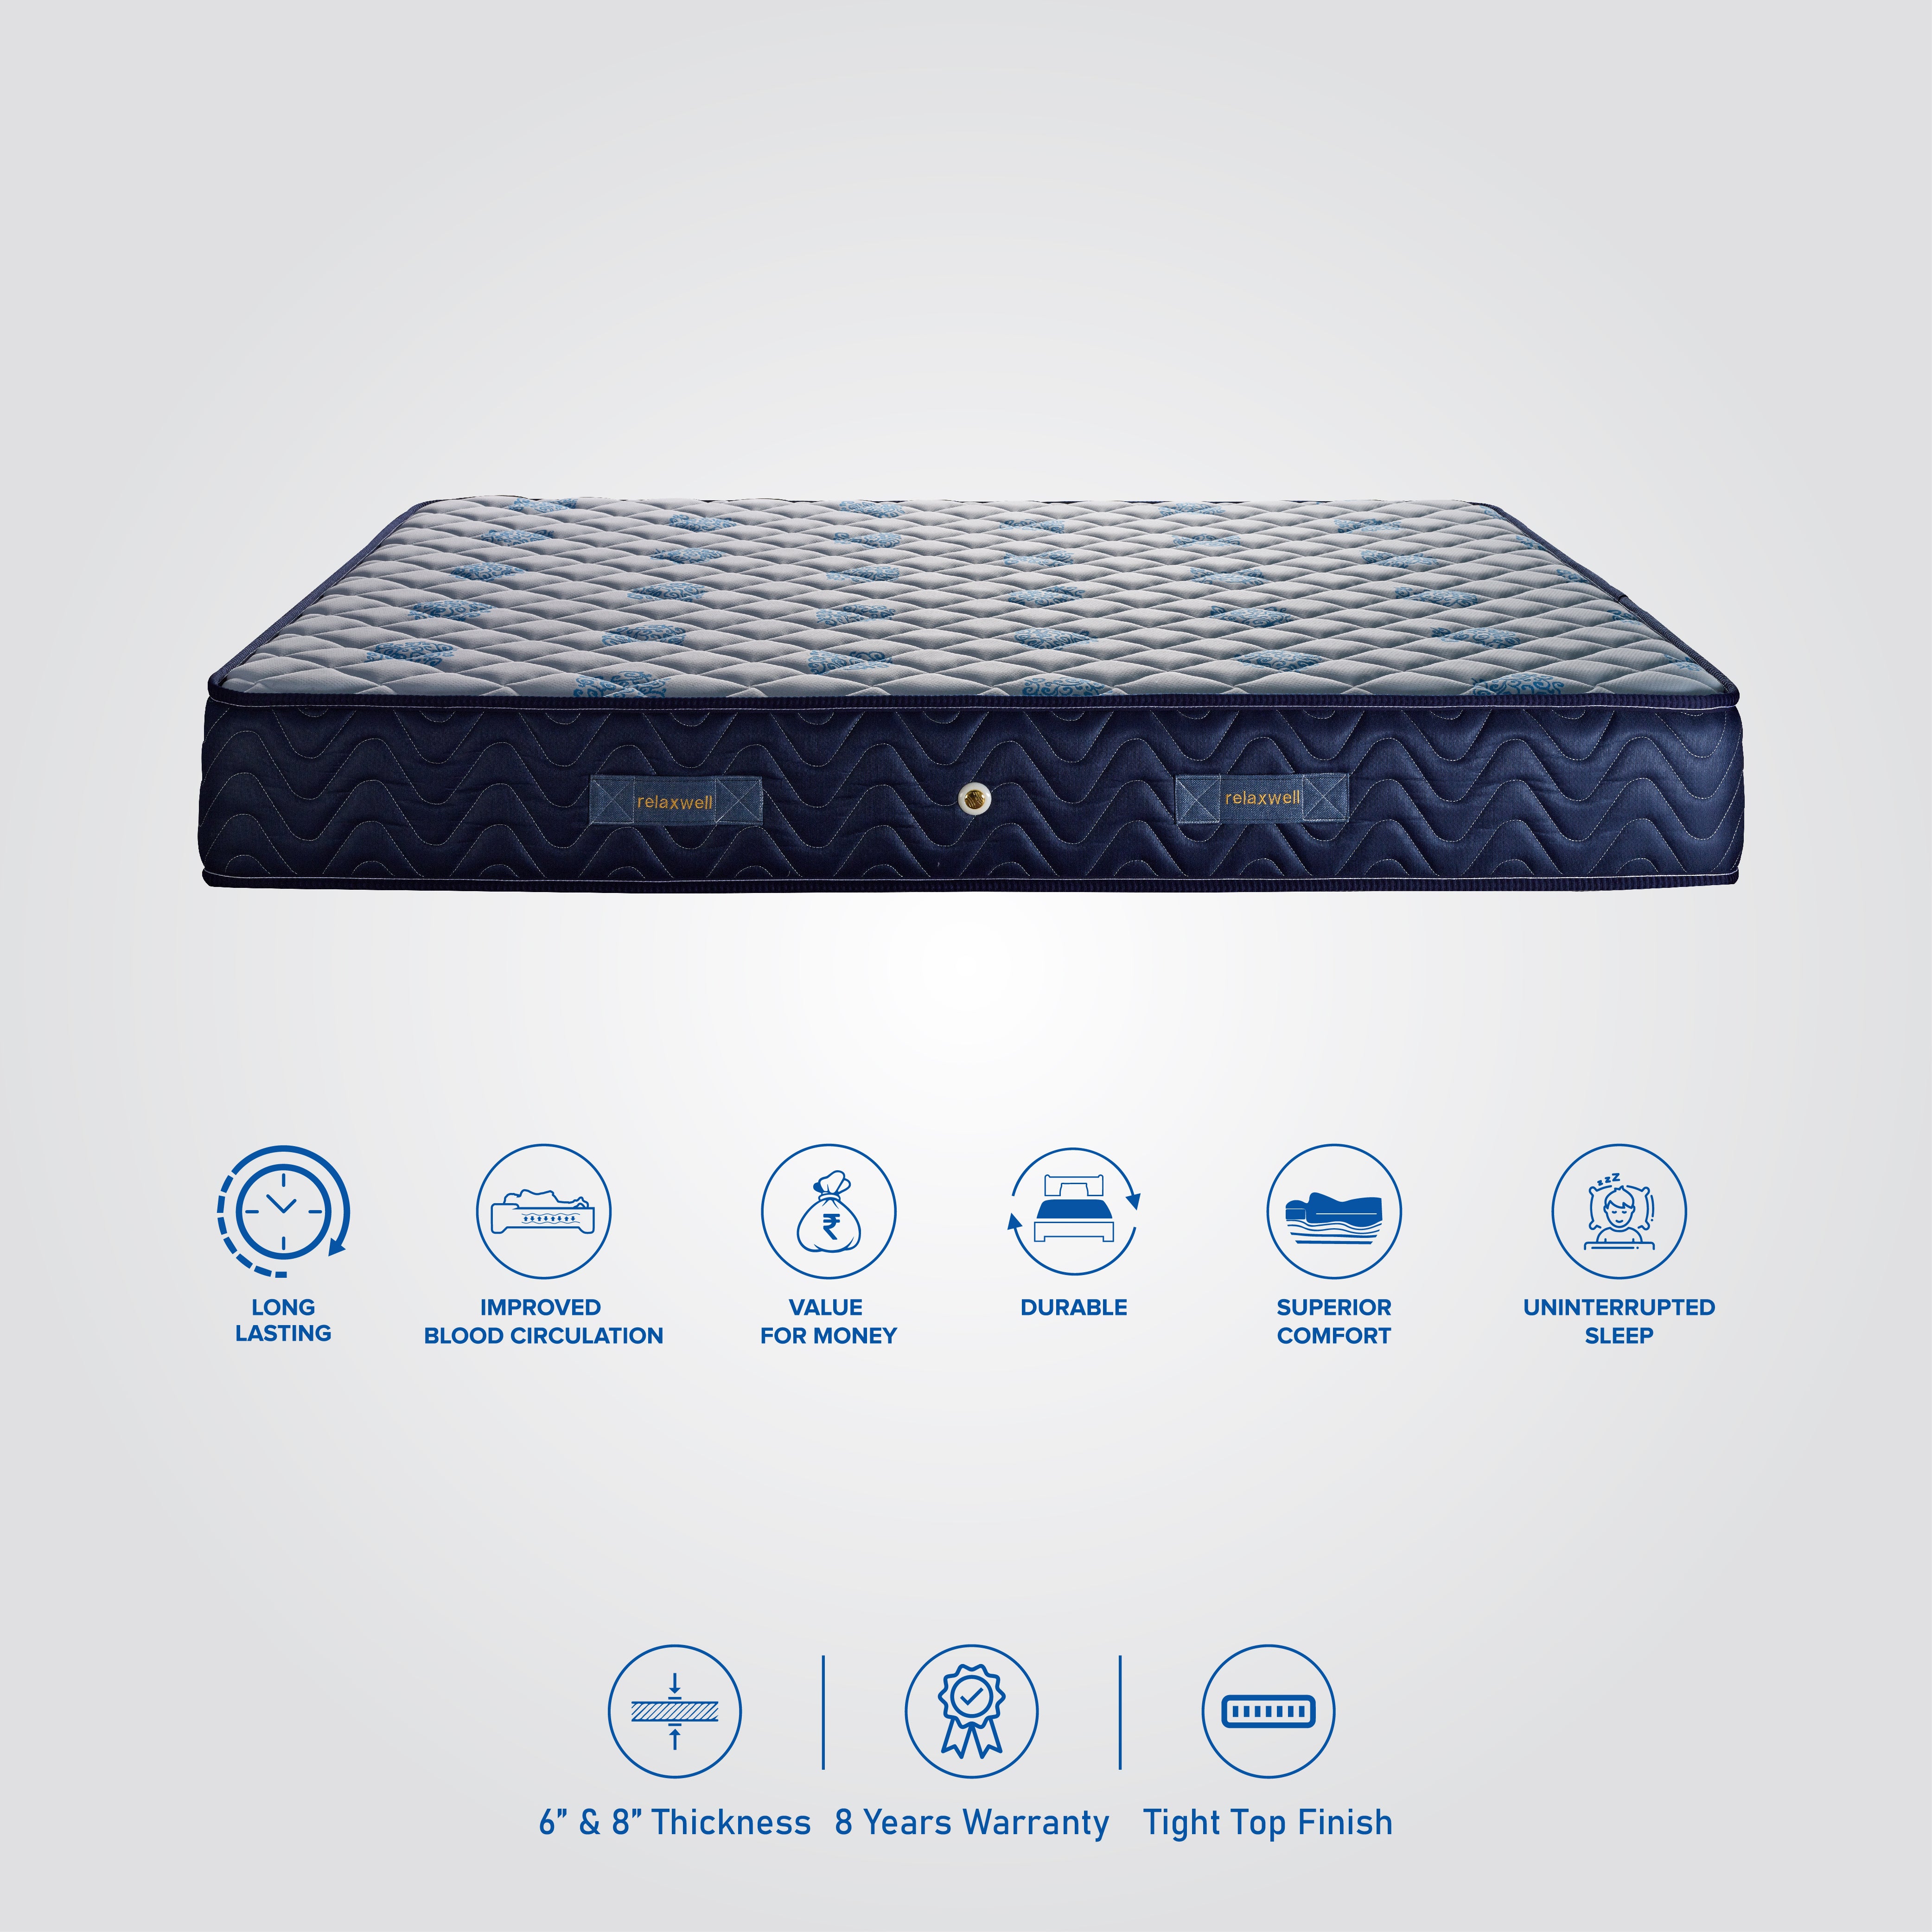 Comfort Pocketed Spring Mattress In India